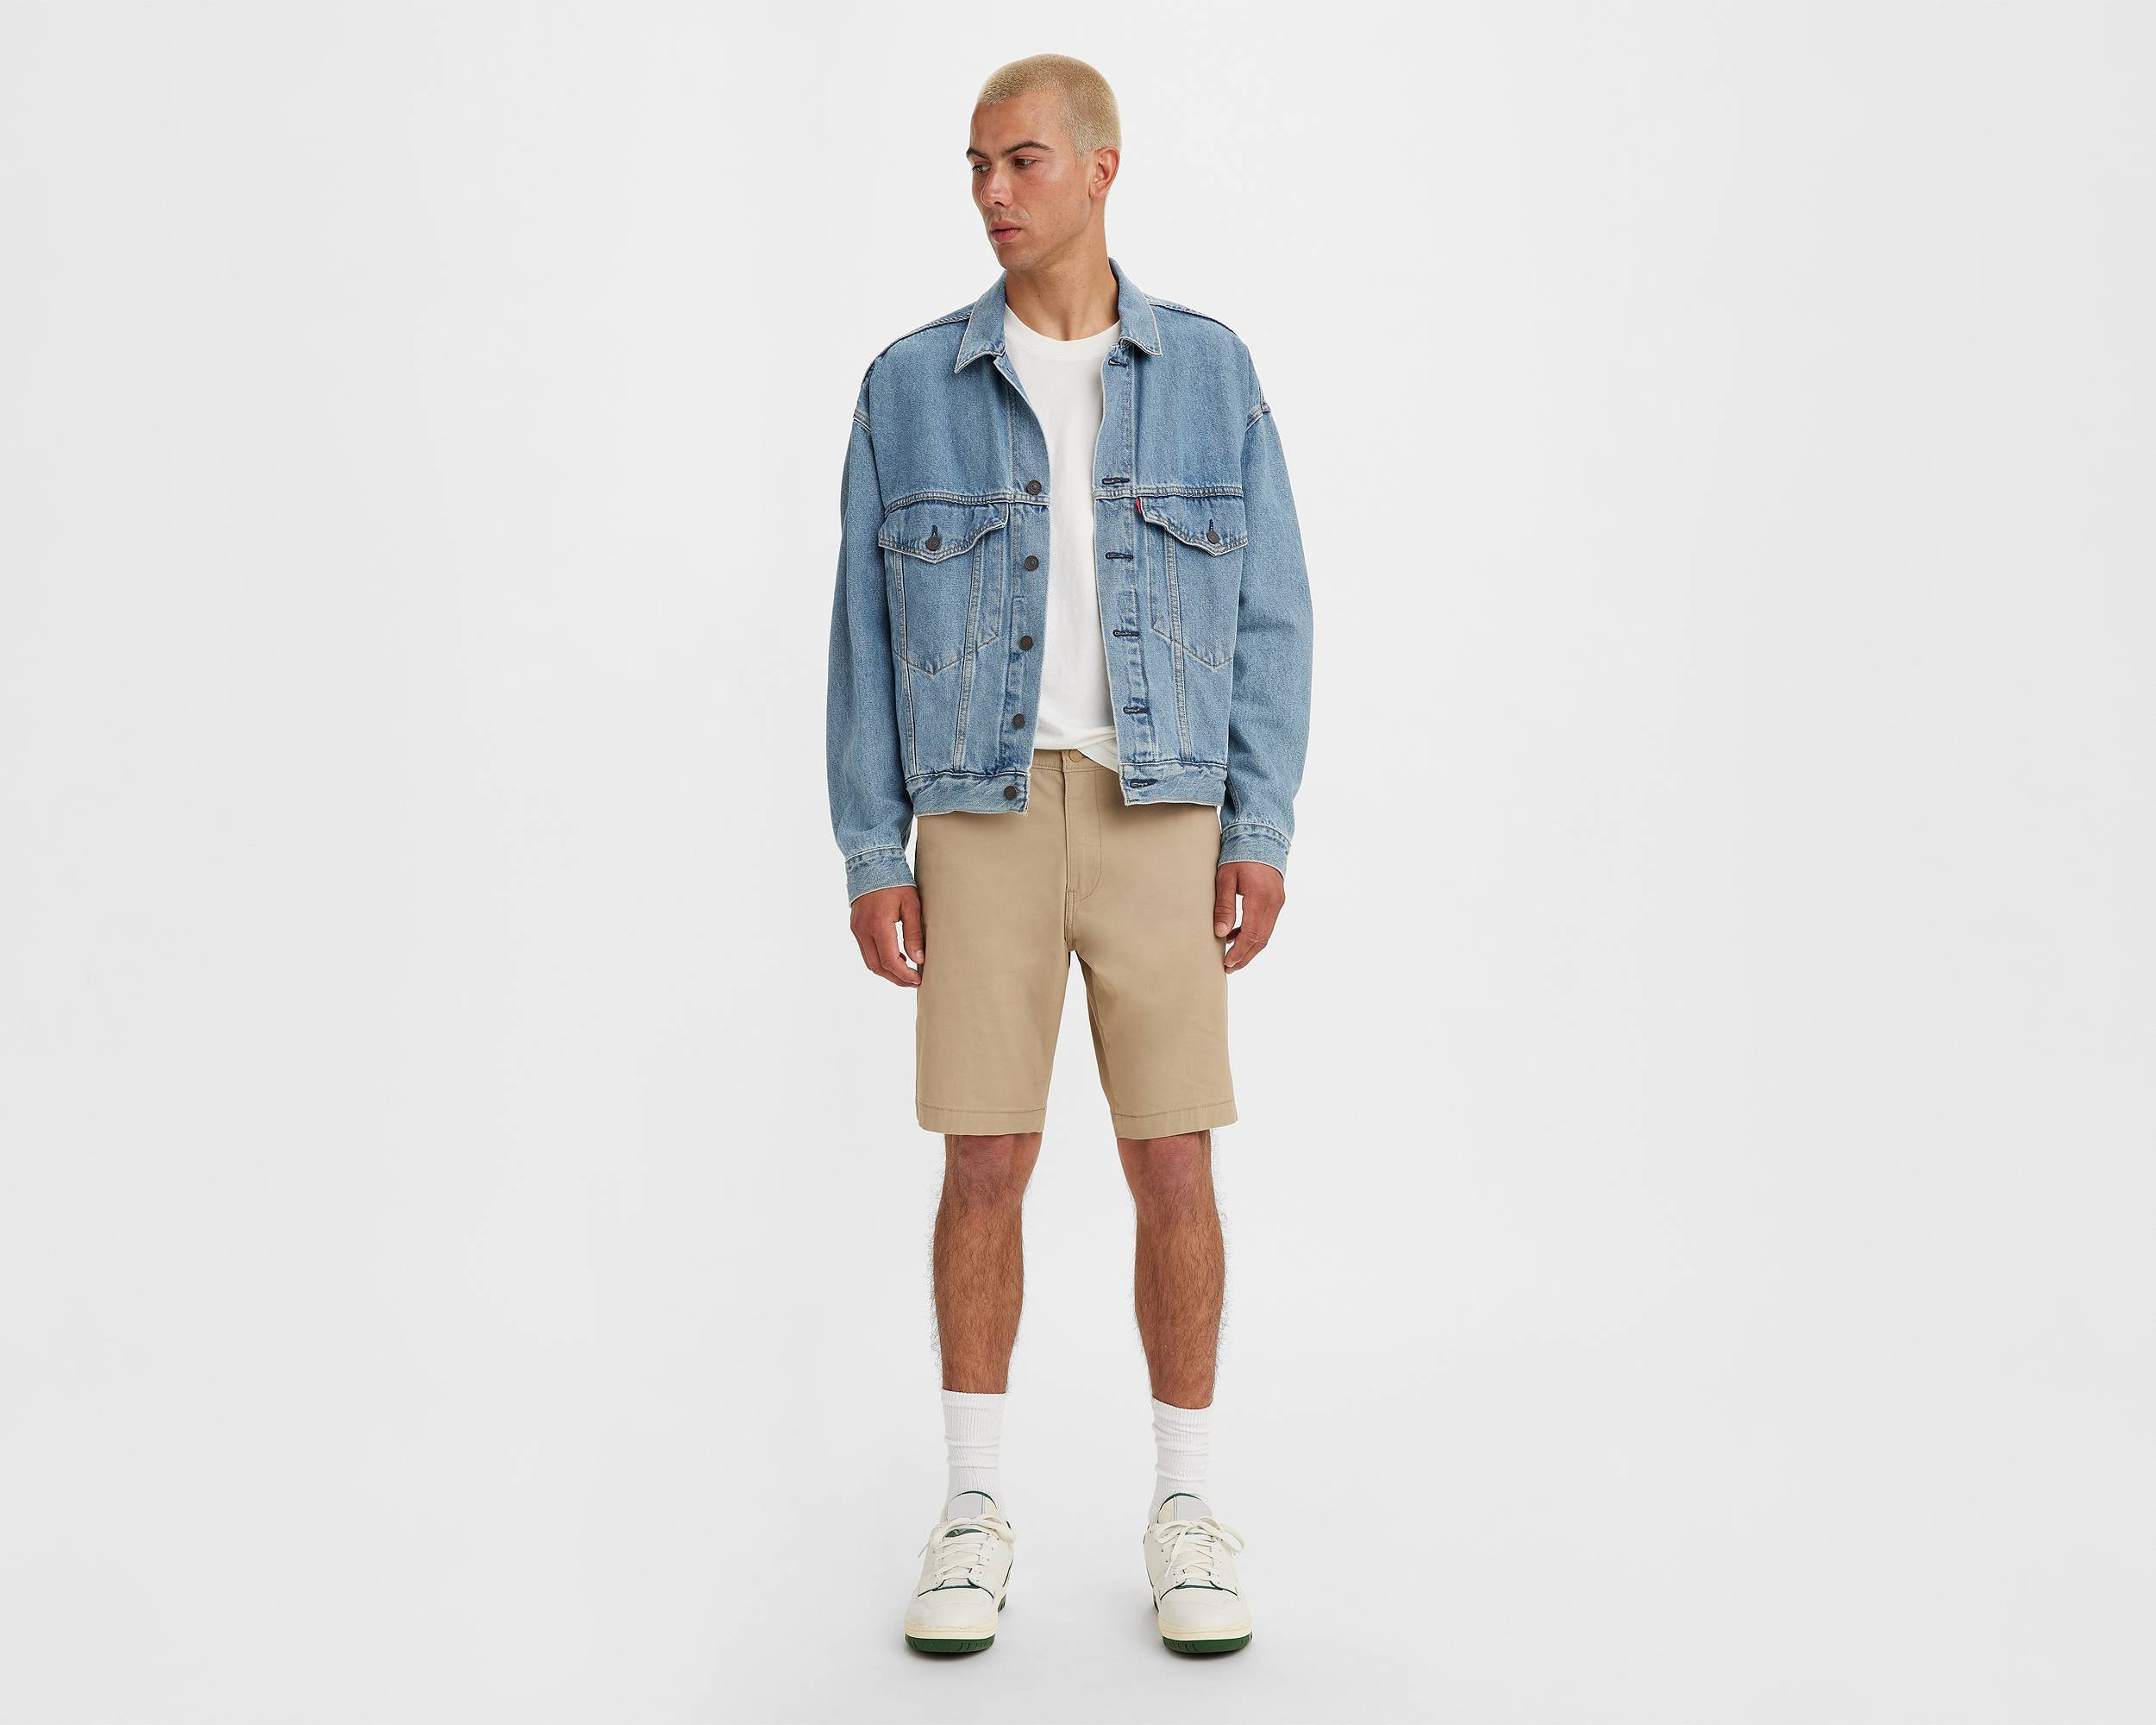 Completely dry depth Cornwall Levi's® XX Chino Taper Shorts - Levi's Jeans, Jackets & Clothing